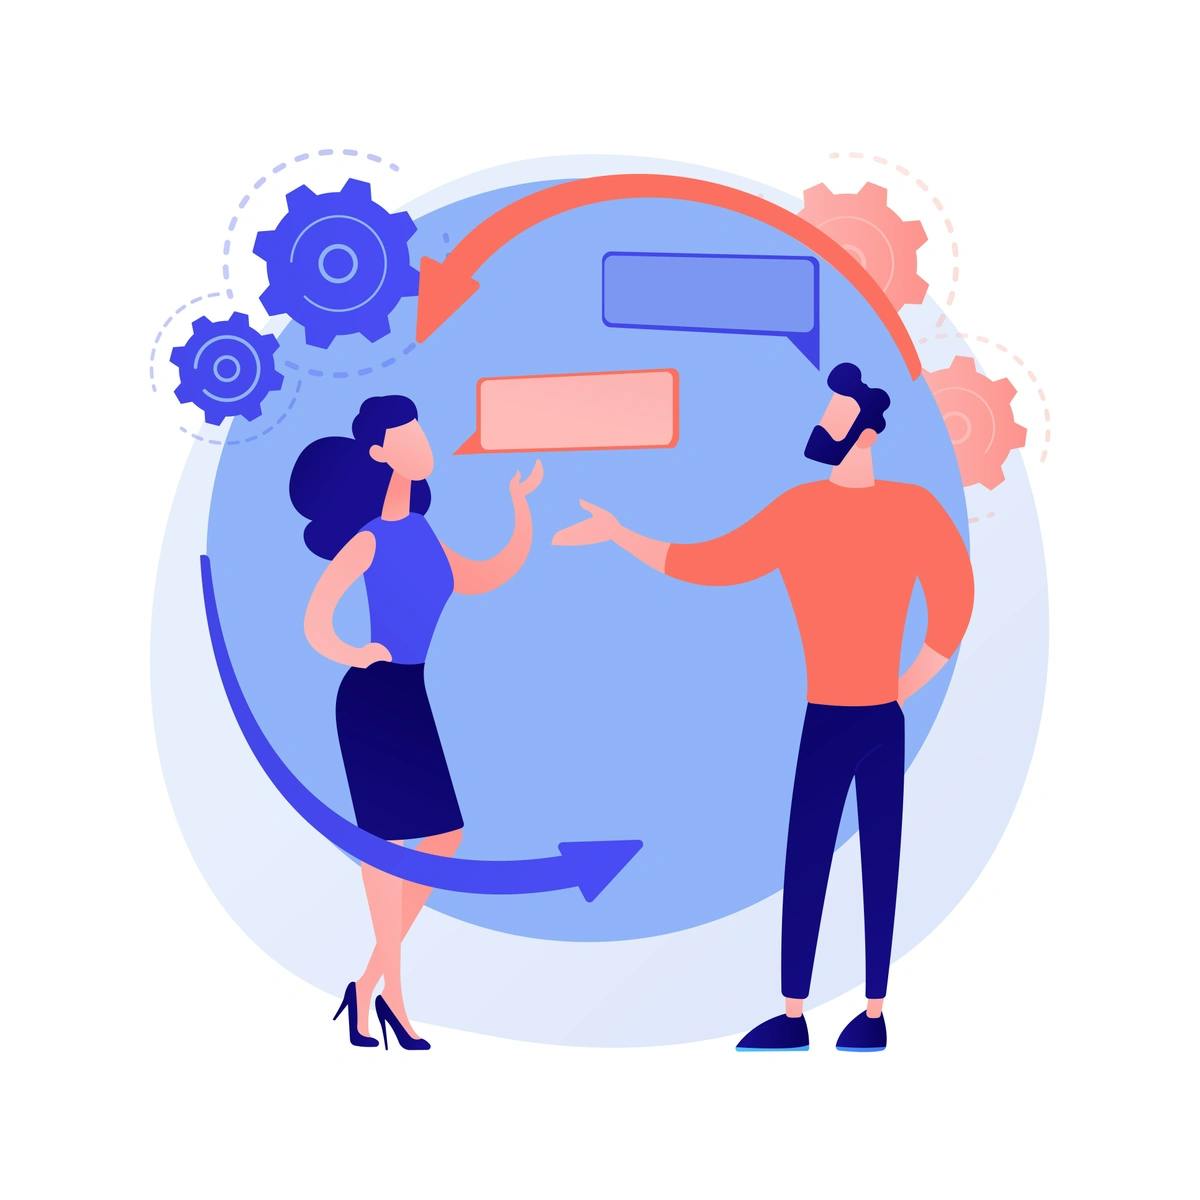 The image is an illustration of a man and a woman engaging in a conversation with speech bubbles, surrounded by a circular arrow and cogwheels, suggesting a concept of continuous communication and workflow processes.